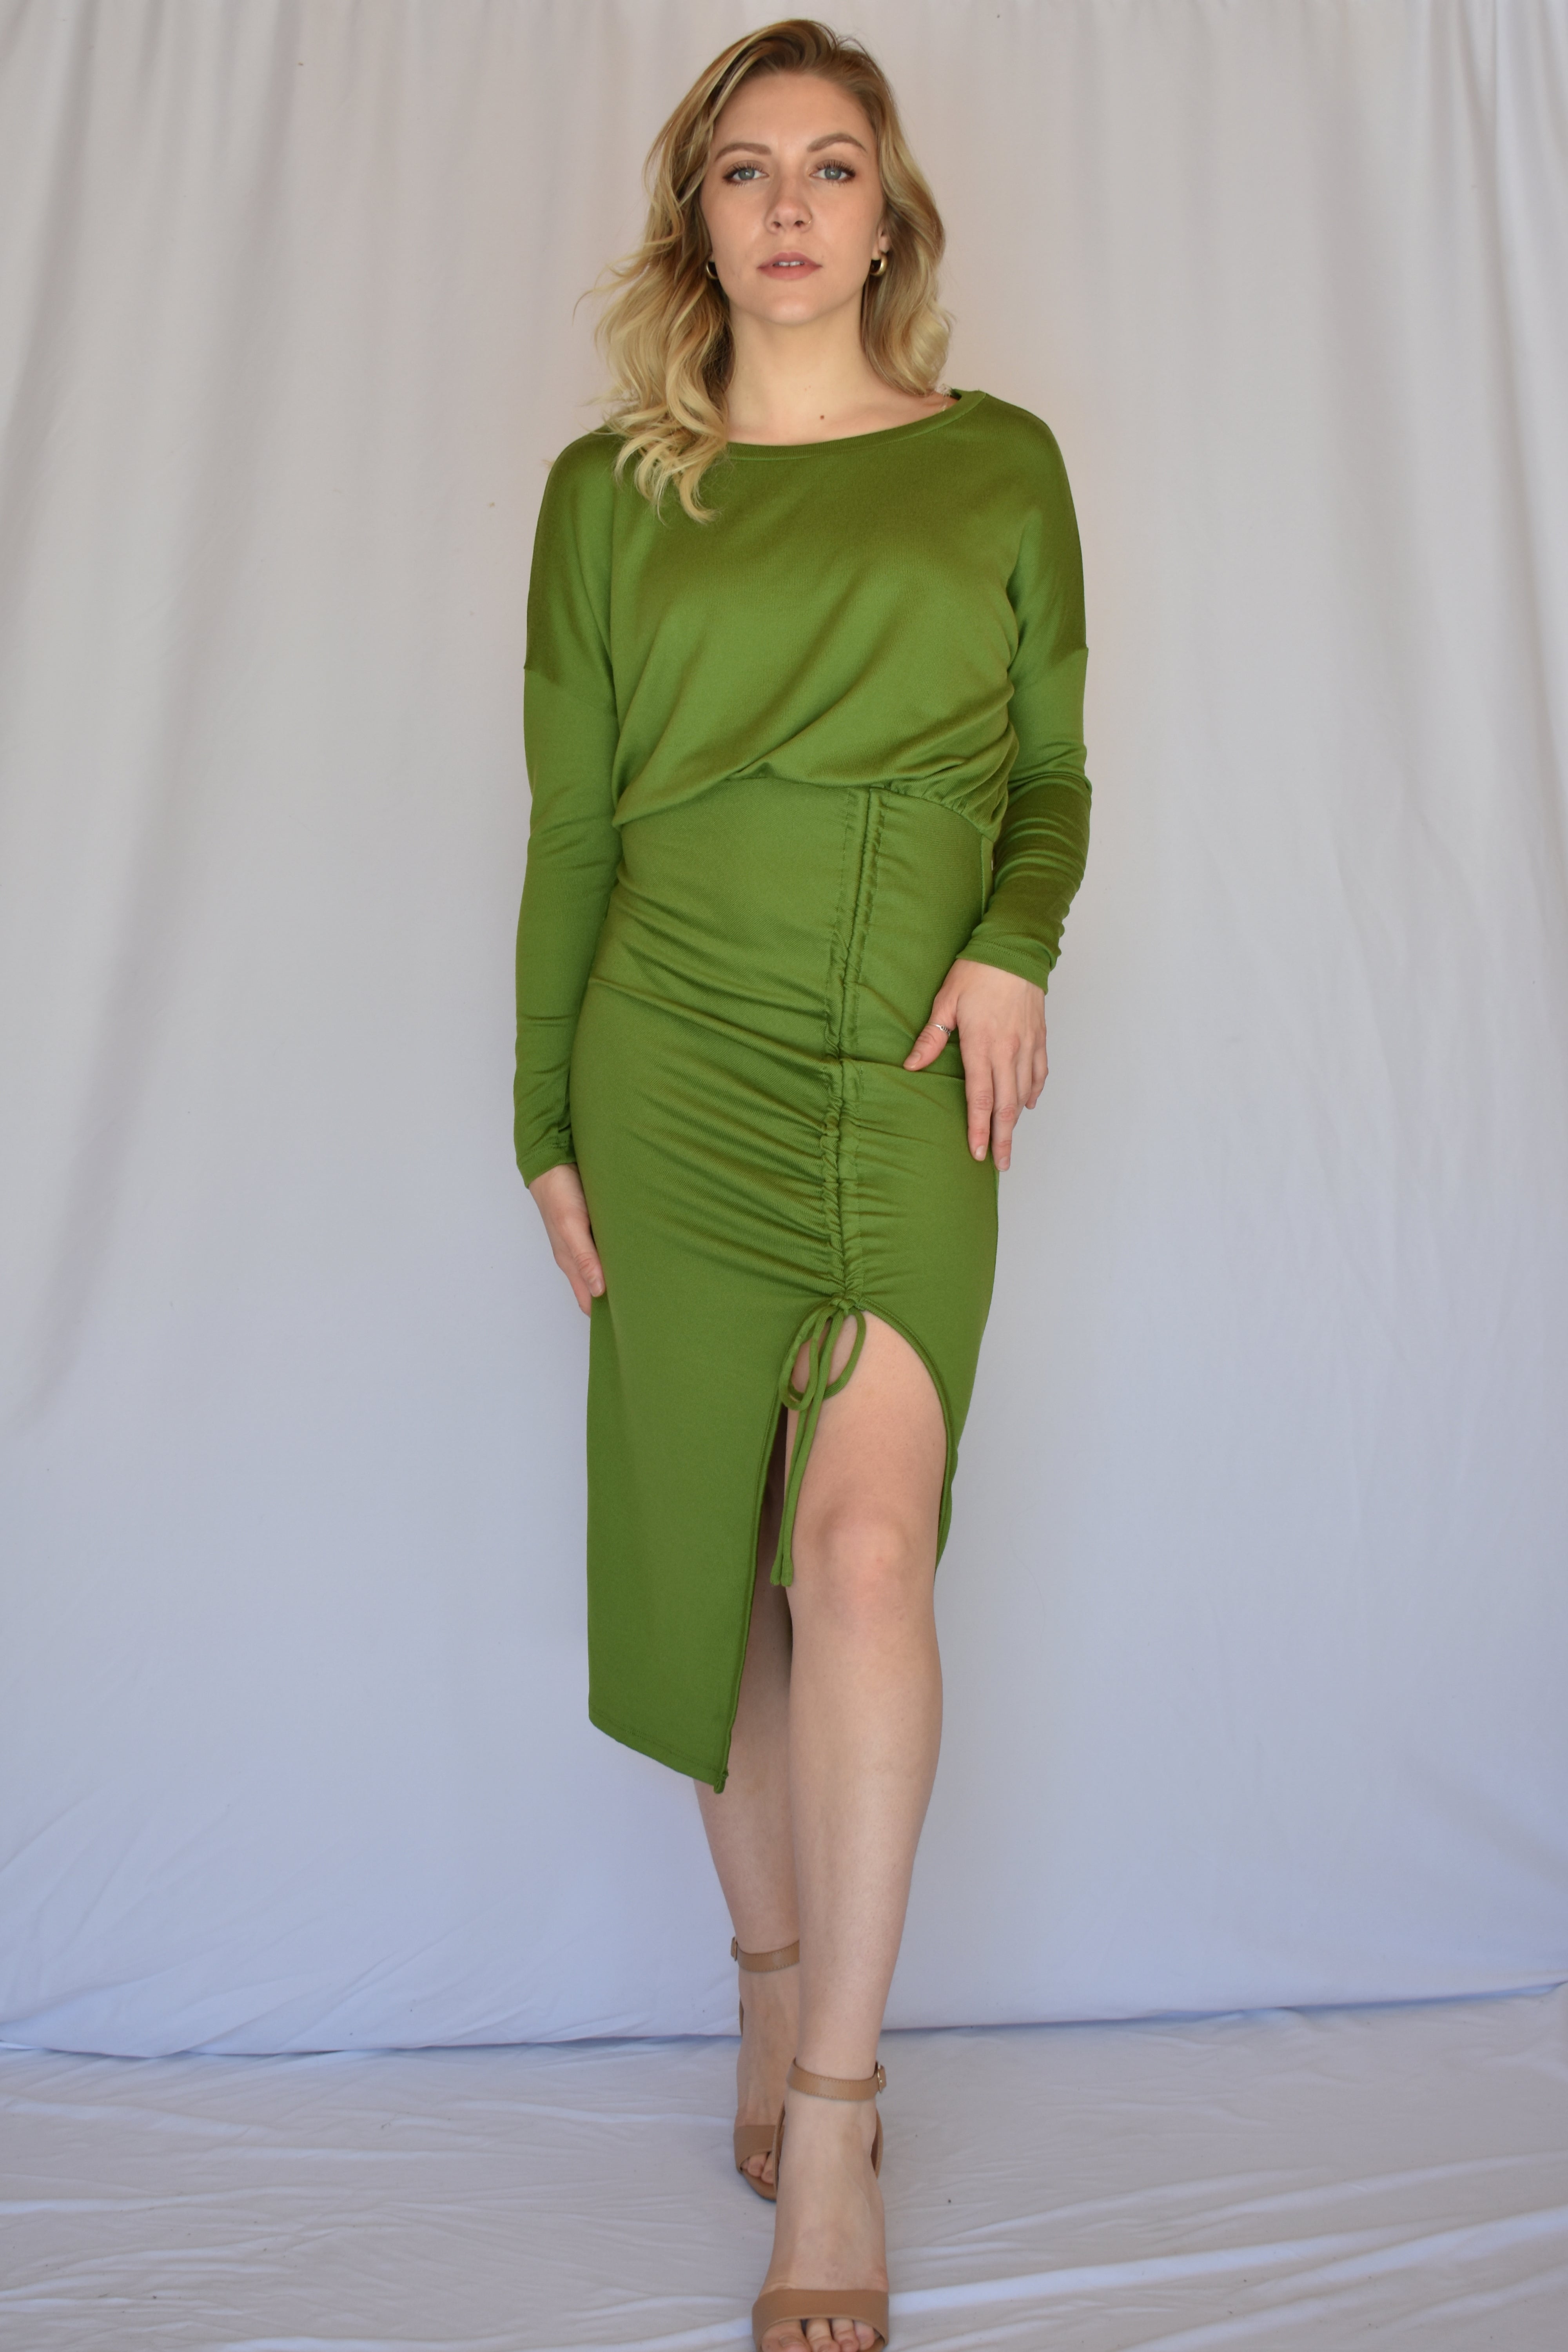 hyfve double zero long sleeve ruched bodycon green chartreuse midi